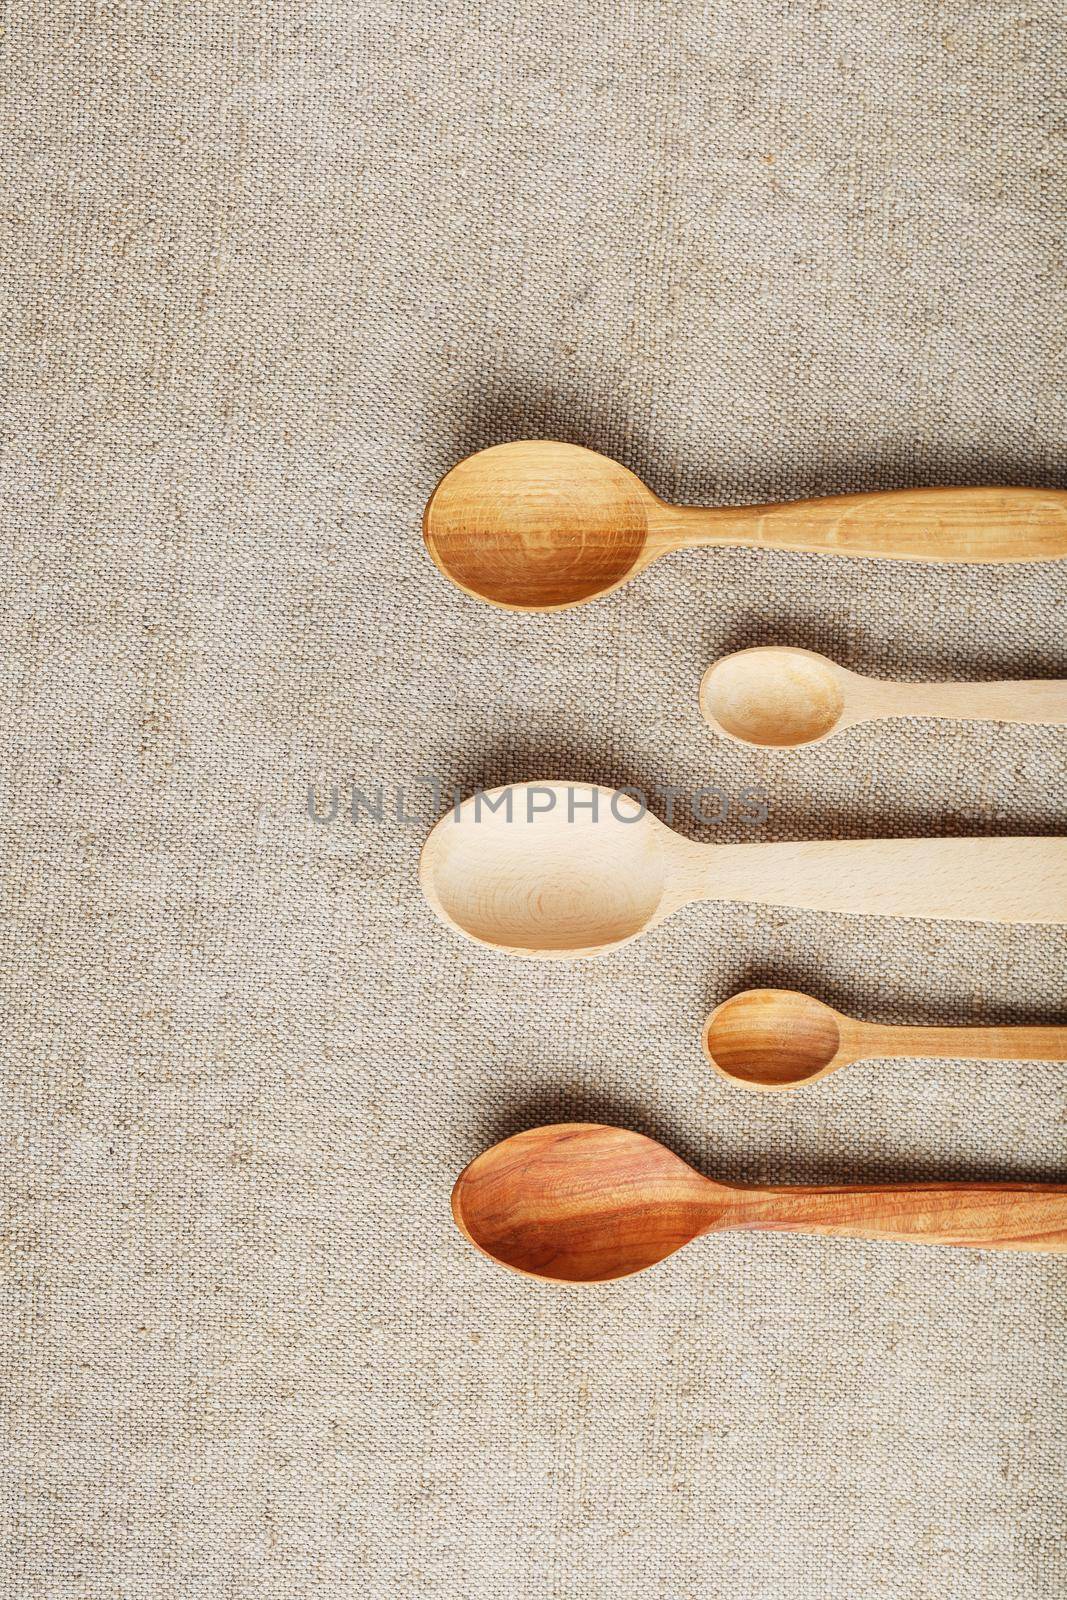 Natural wood spoons in a row on burlap fabric. Natural natural materials. Caring for the environment